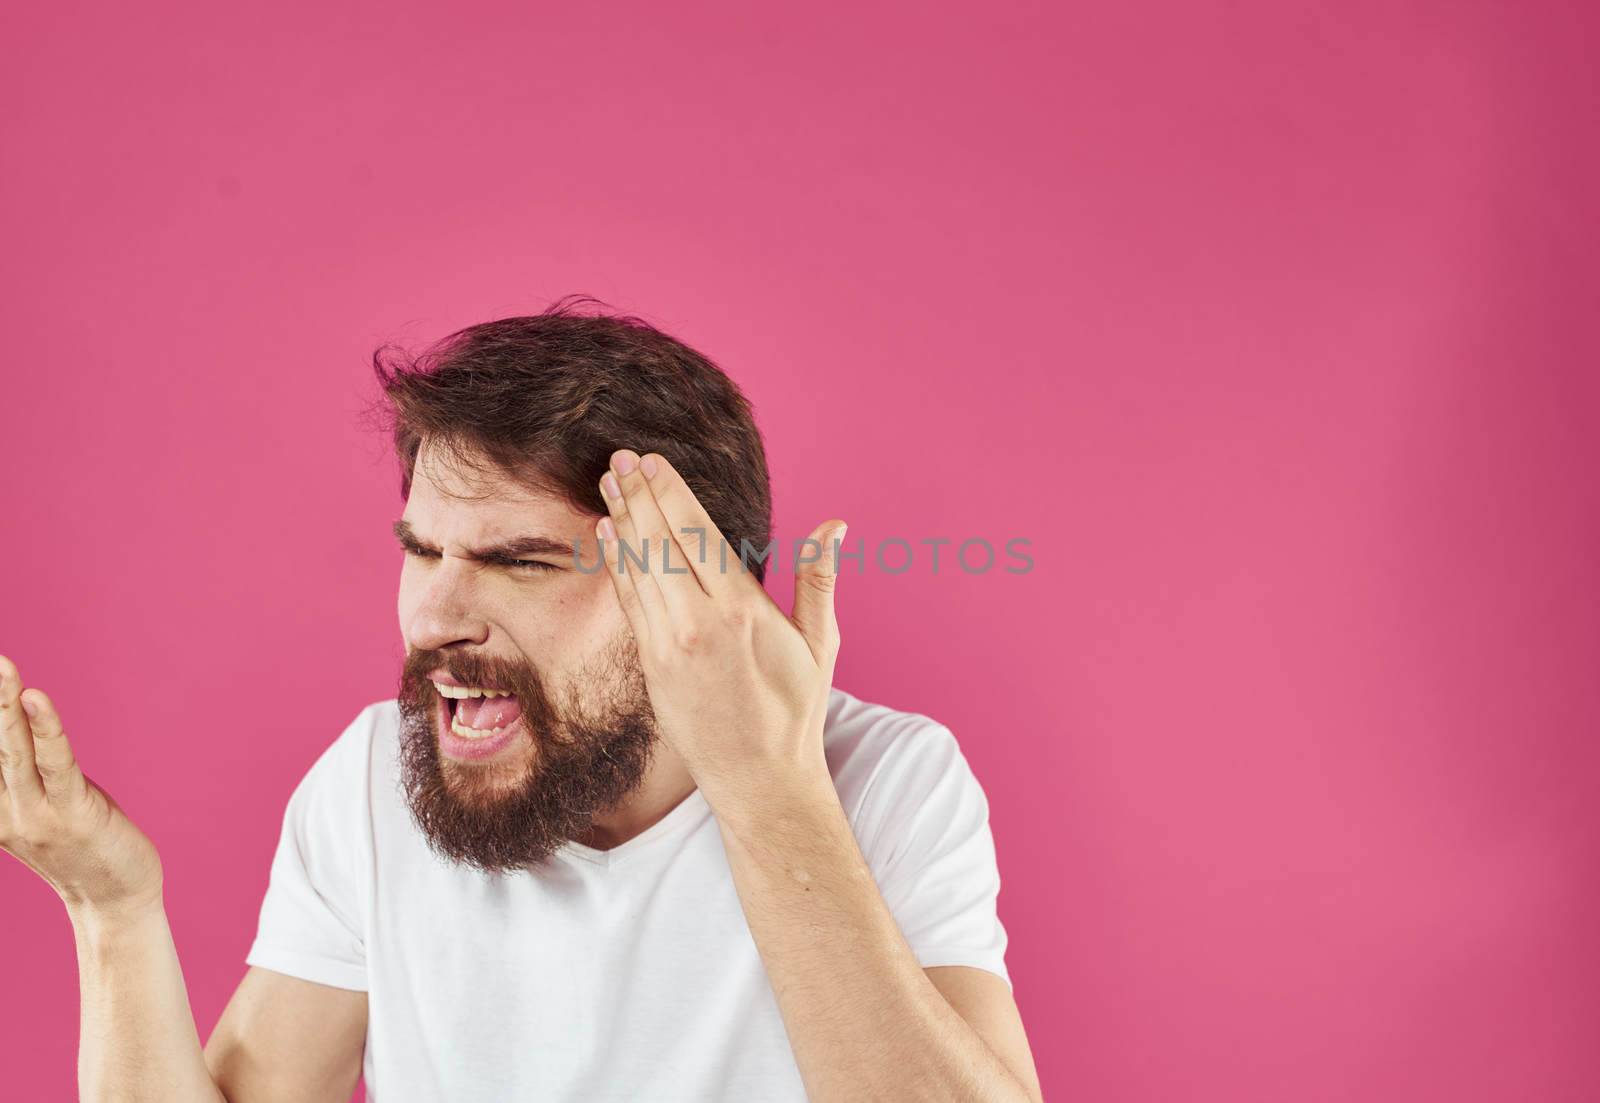 An indignant man gestures with his hands in a white T-shirt on a pink background. High quality photo